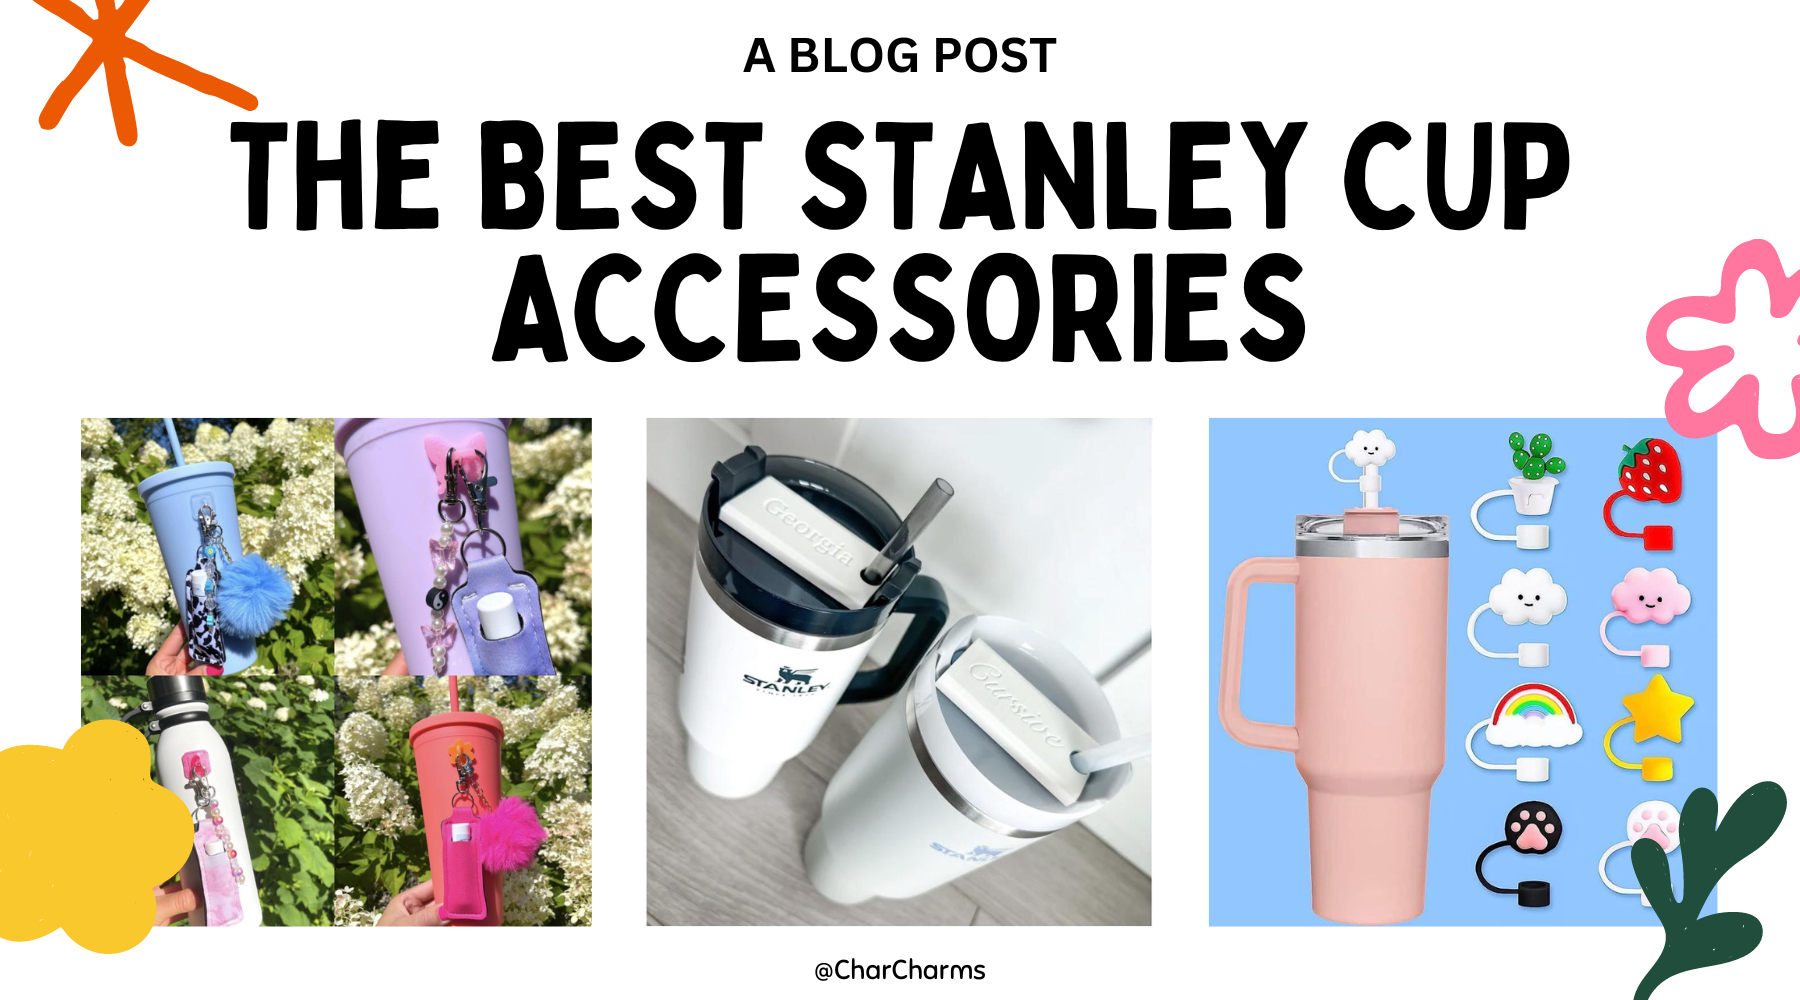 The Best Stanley Cup Accessories